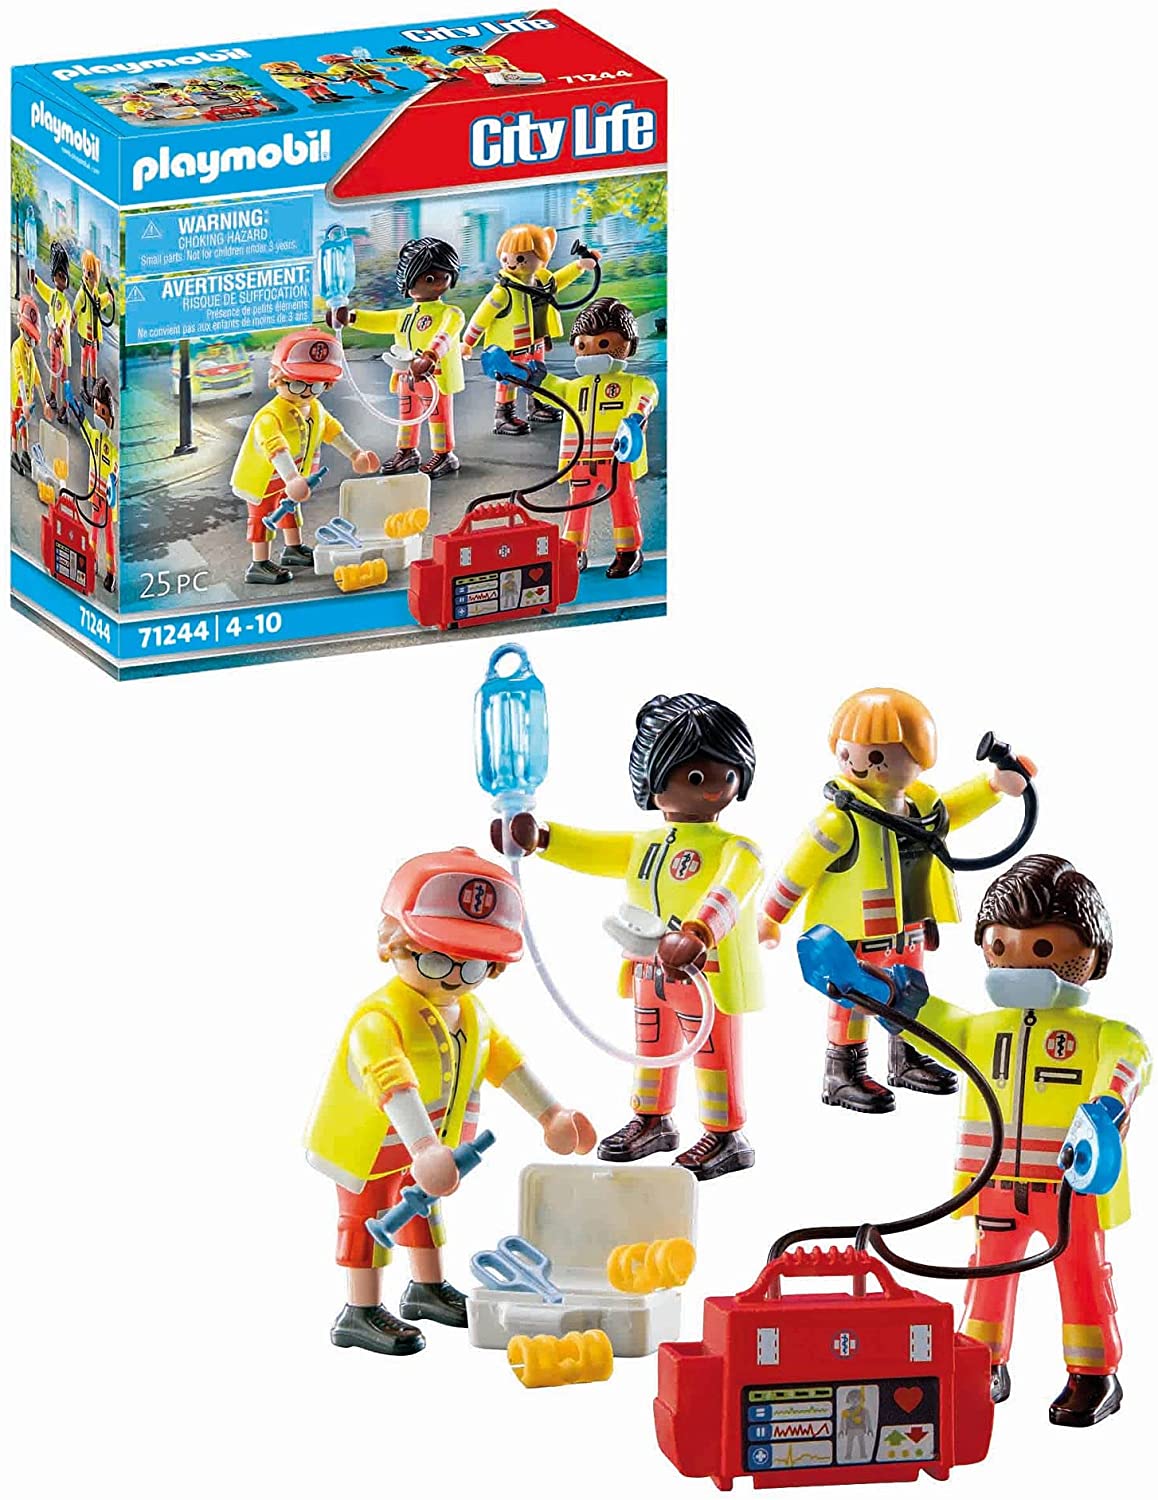 Playmobil City Life 71244 Rescue Team, Toy for Children from 4 years